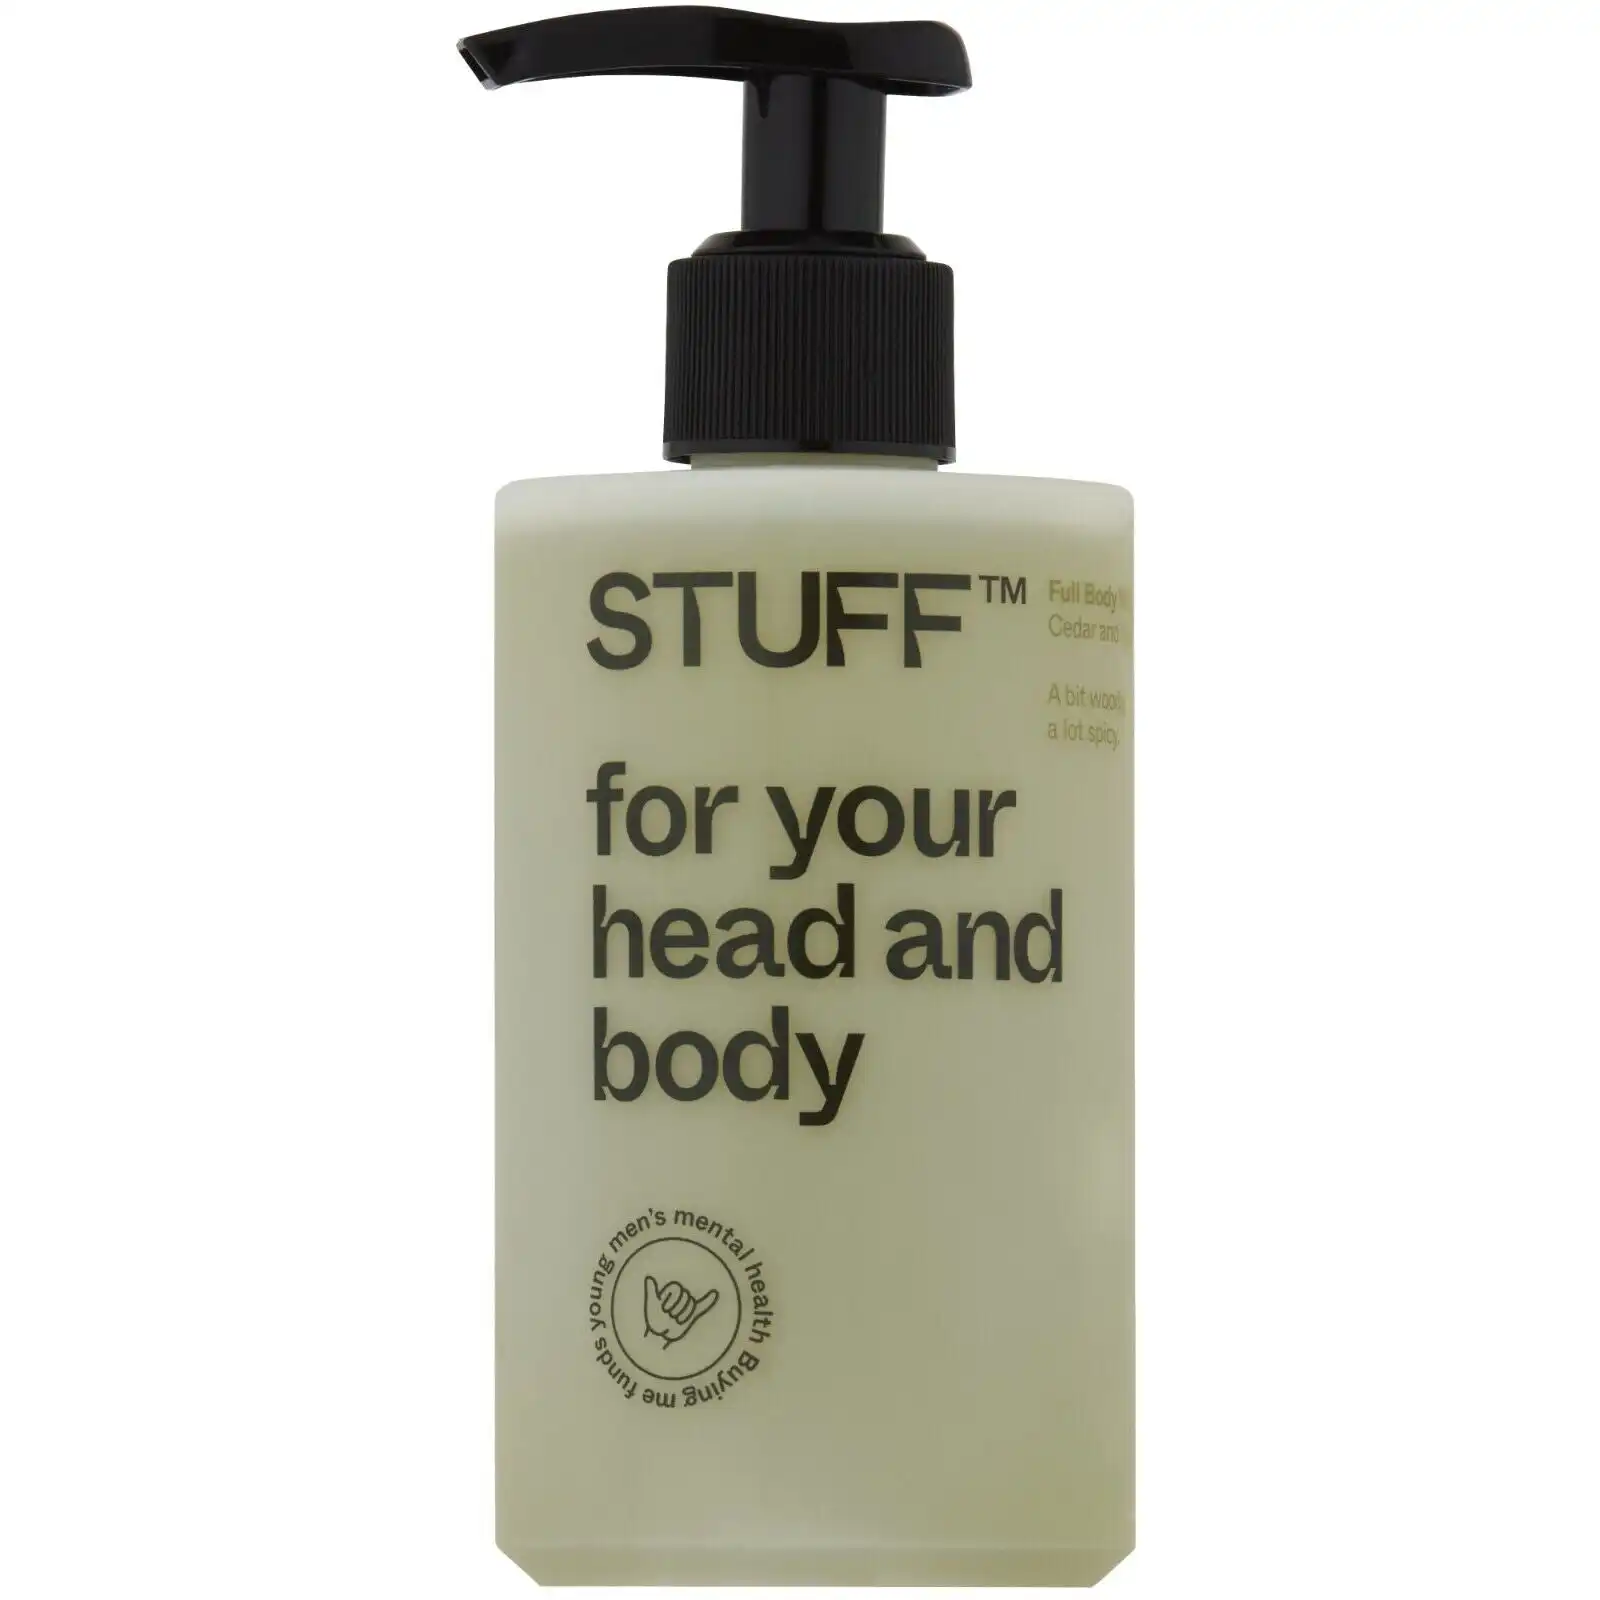 STUFF For Your Head & Body Shampoo And Body Wash Men's Cedar And Spice 450ml